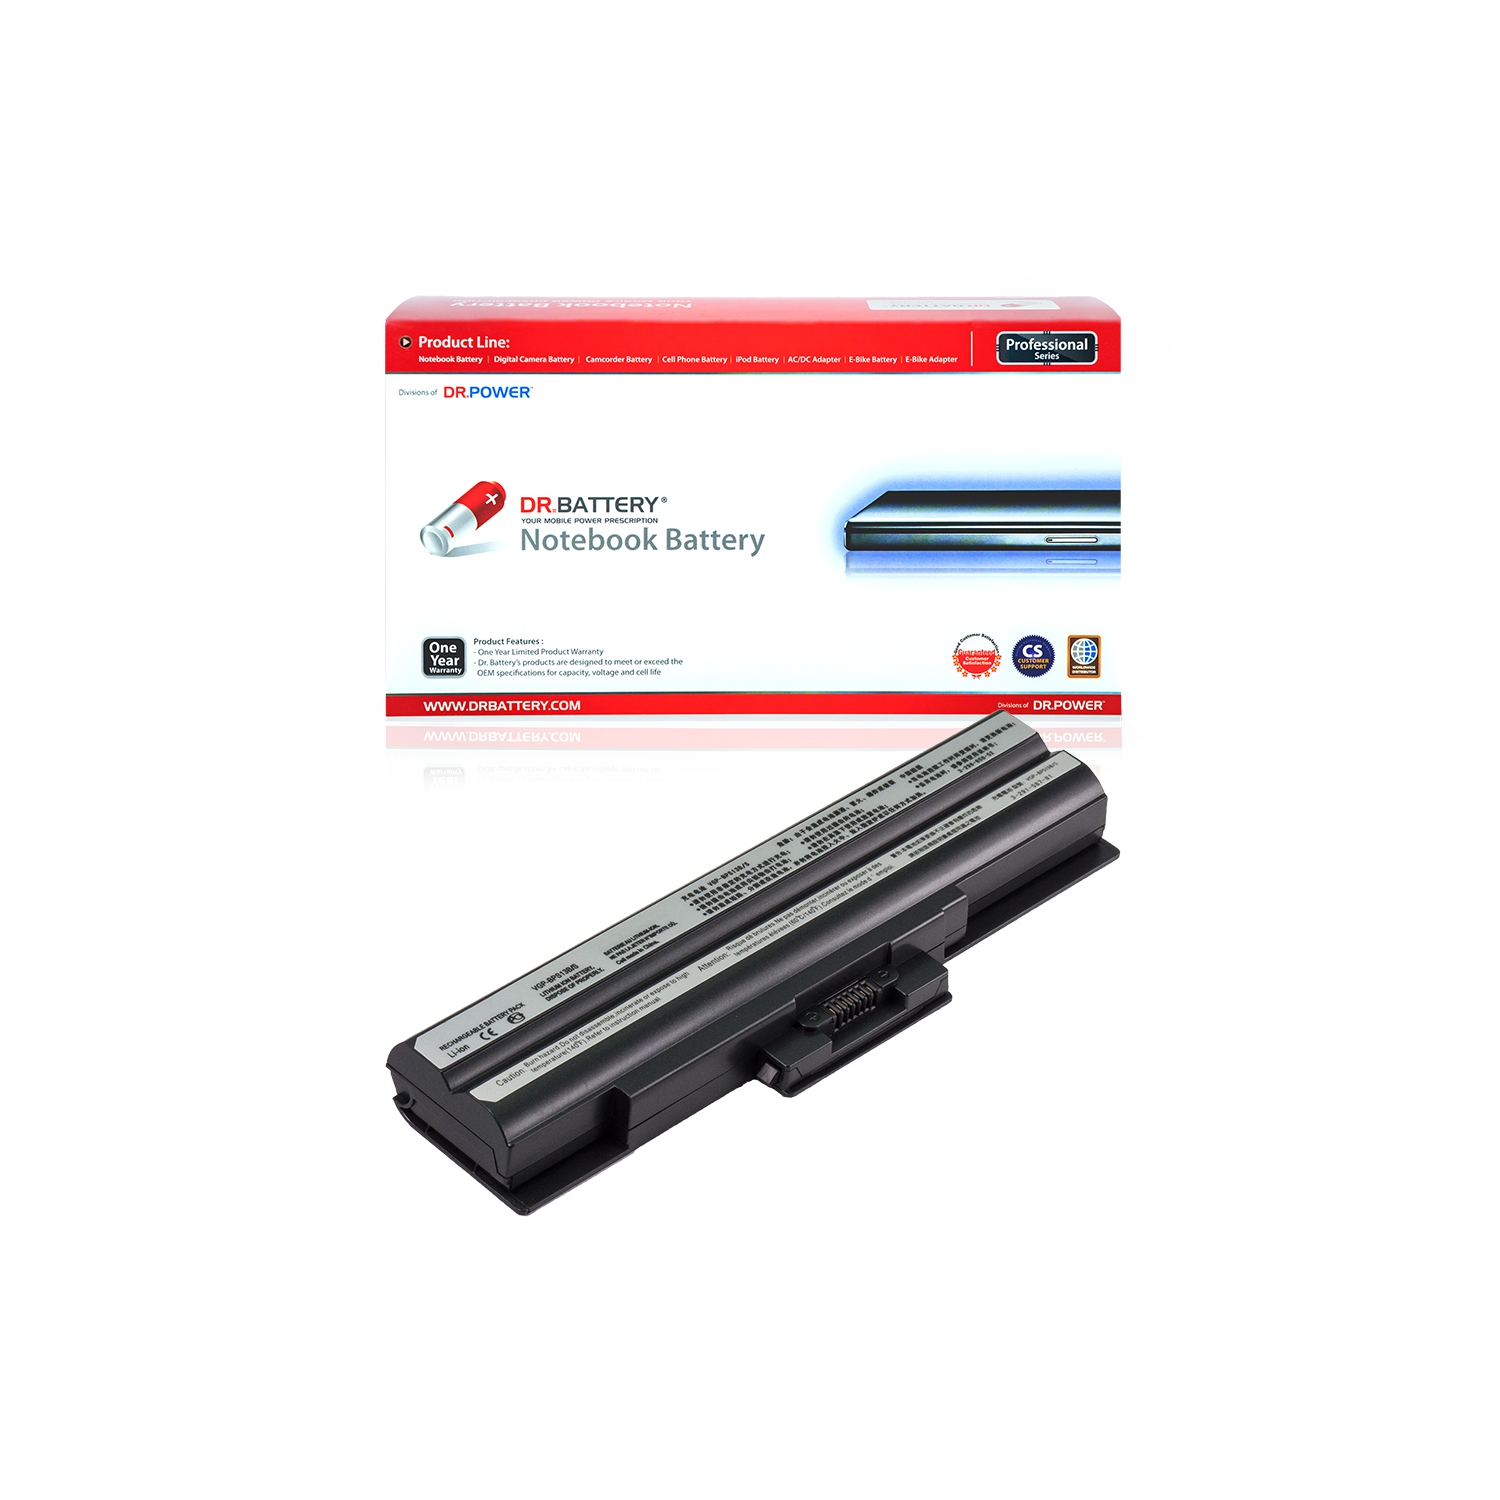 Laptop Battery Replacement for Sony VAIO VGN-AW110J/H, VGP-BPS13, VGP-BPS13/S, VGP-BPS13A/Q, VGP-BPS13B/B, VGP-BSP13/S